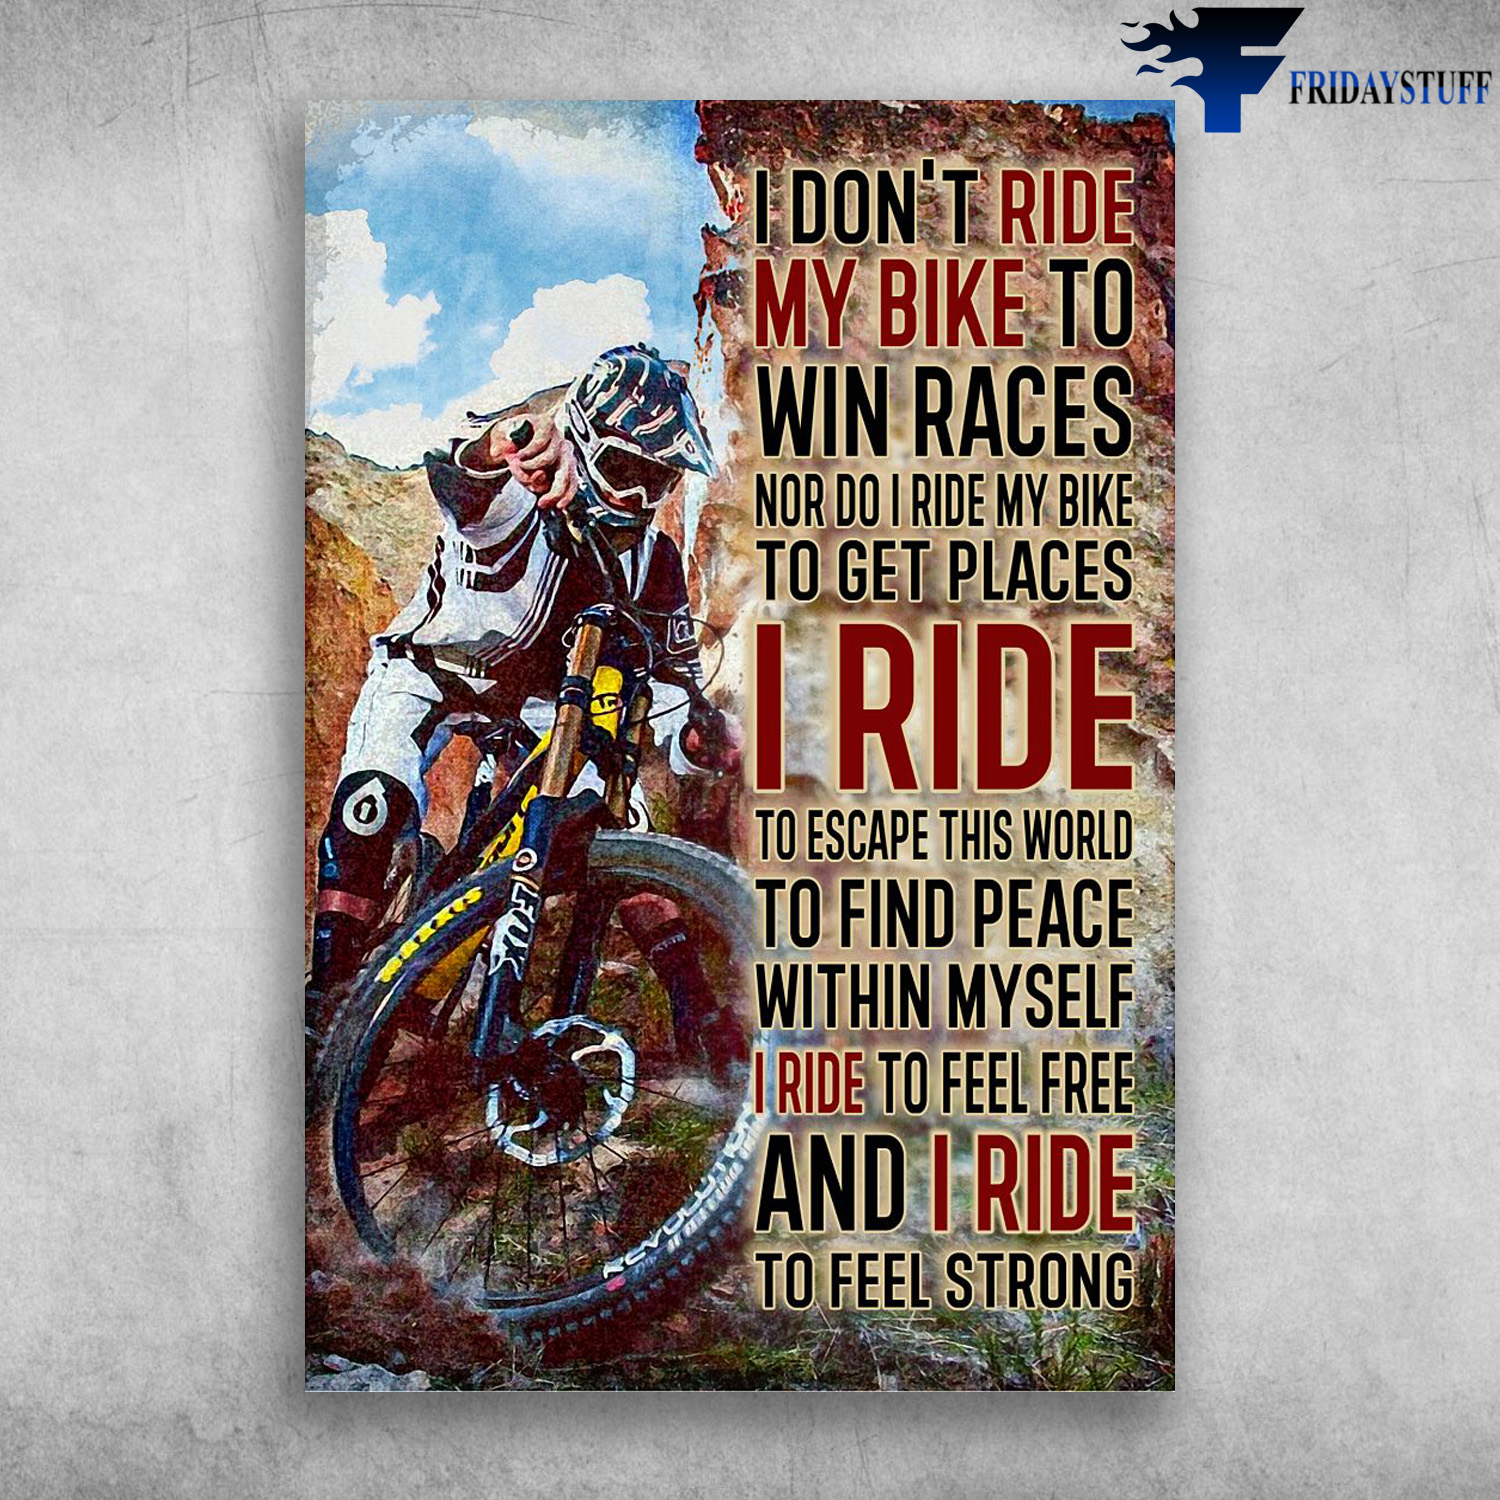 Cycling Man - I Don't Ride My Bike, To Win Races, Nor Do I Ride My Bike To Get Places, I Ride To Escape This World, To Find Peace Within My Self, I Ride To Feel Free, And Ride To Feel Strong